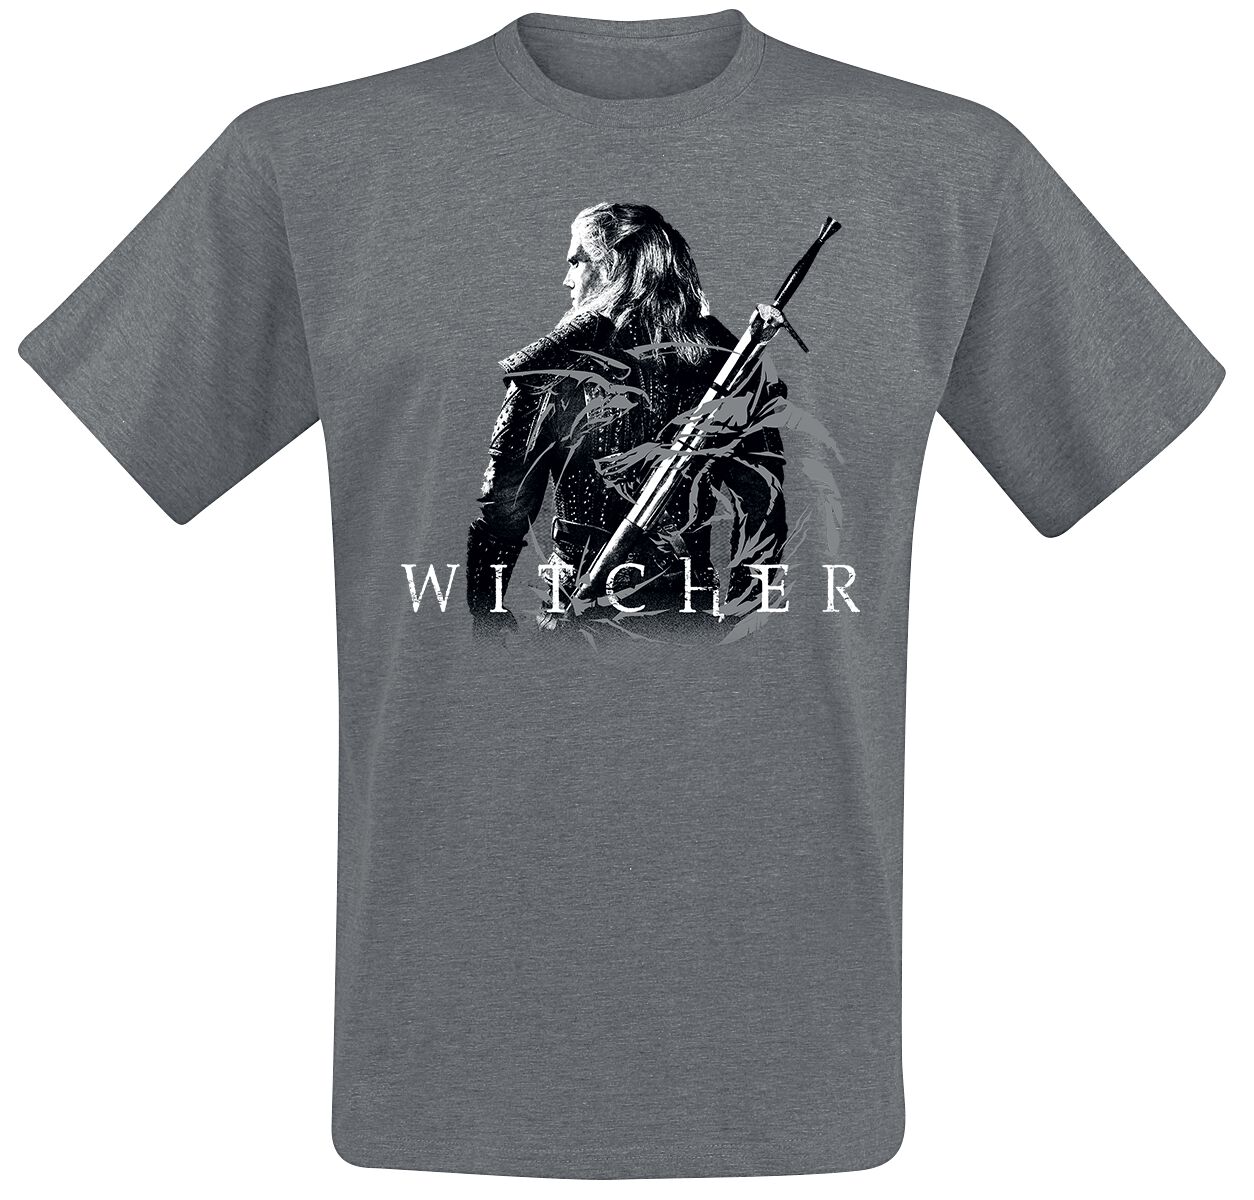 The Witcher Pose T-Shirt mottled dark grey